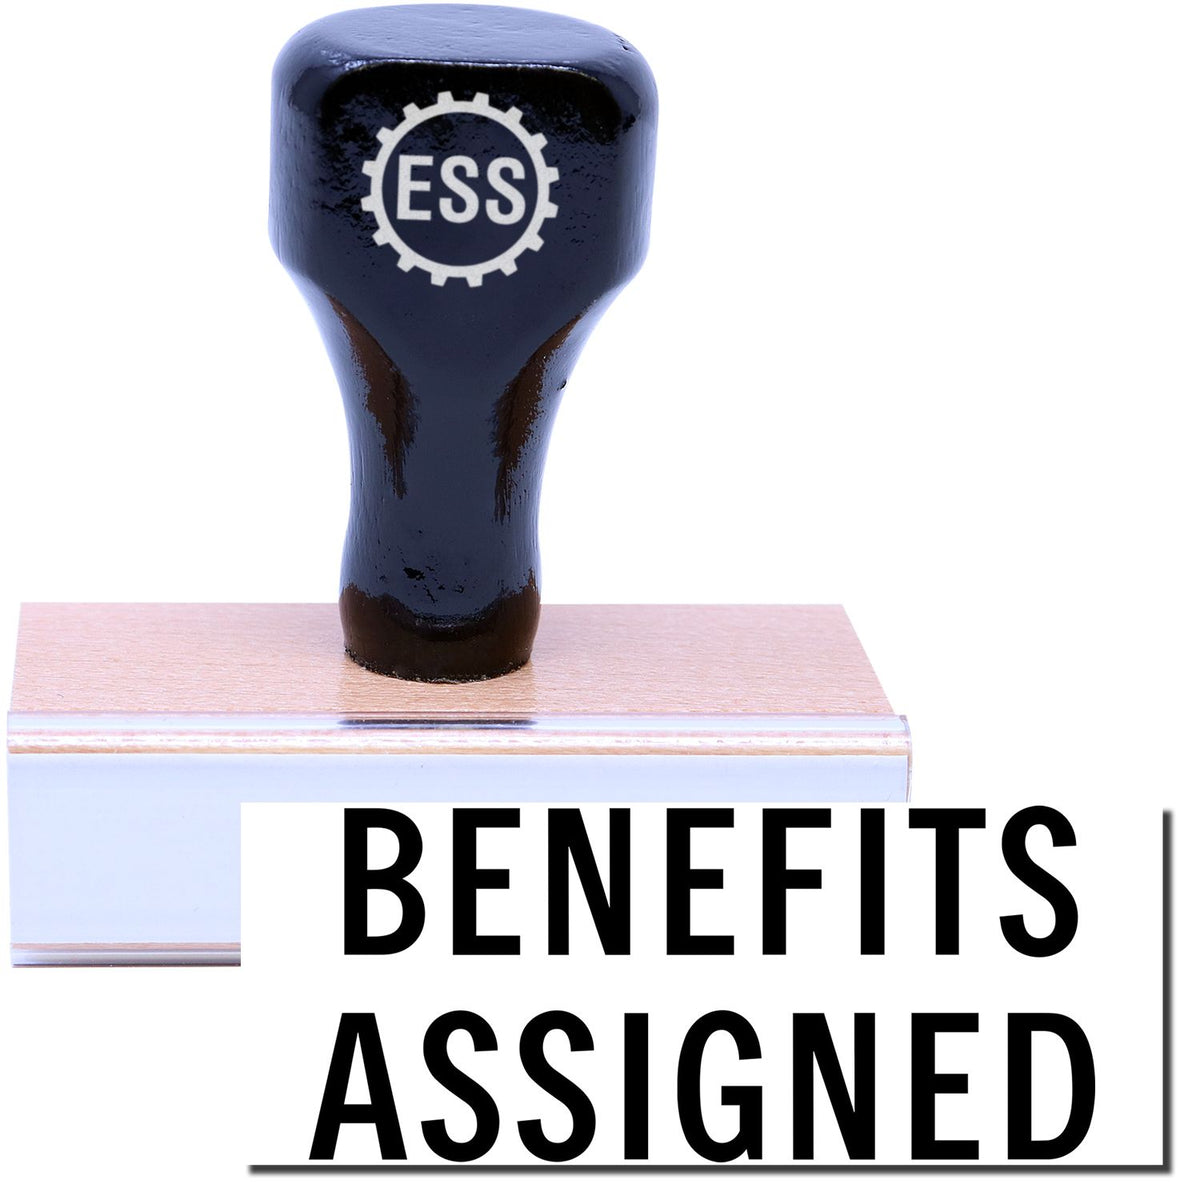 A stock office rubber stamp with a stamped image showing how the text &quot;BENEFITS ASSIGNED&quot; in a large font is displayed after stamping.